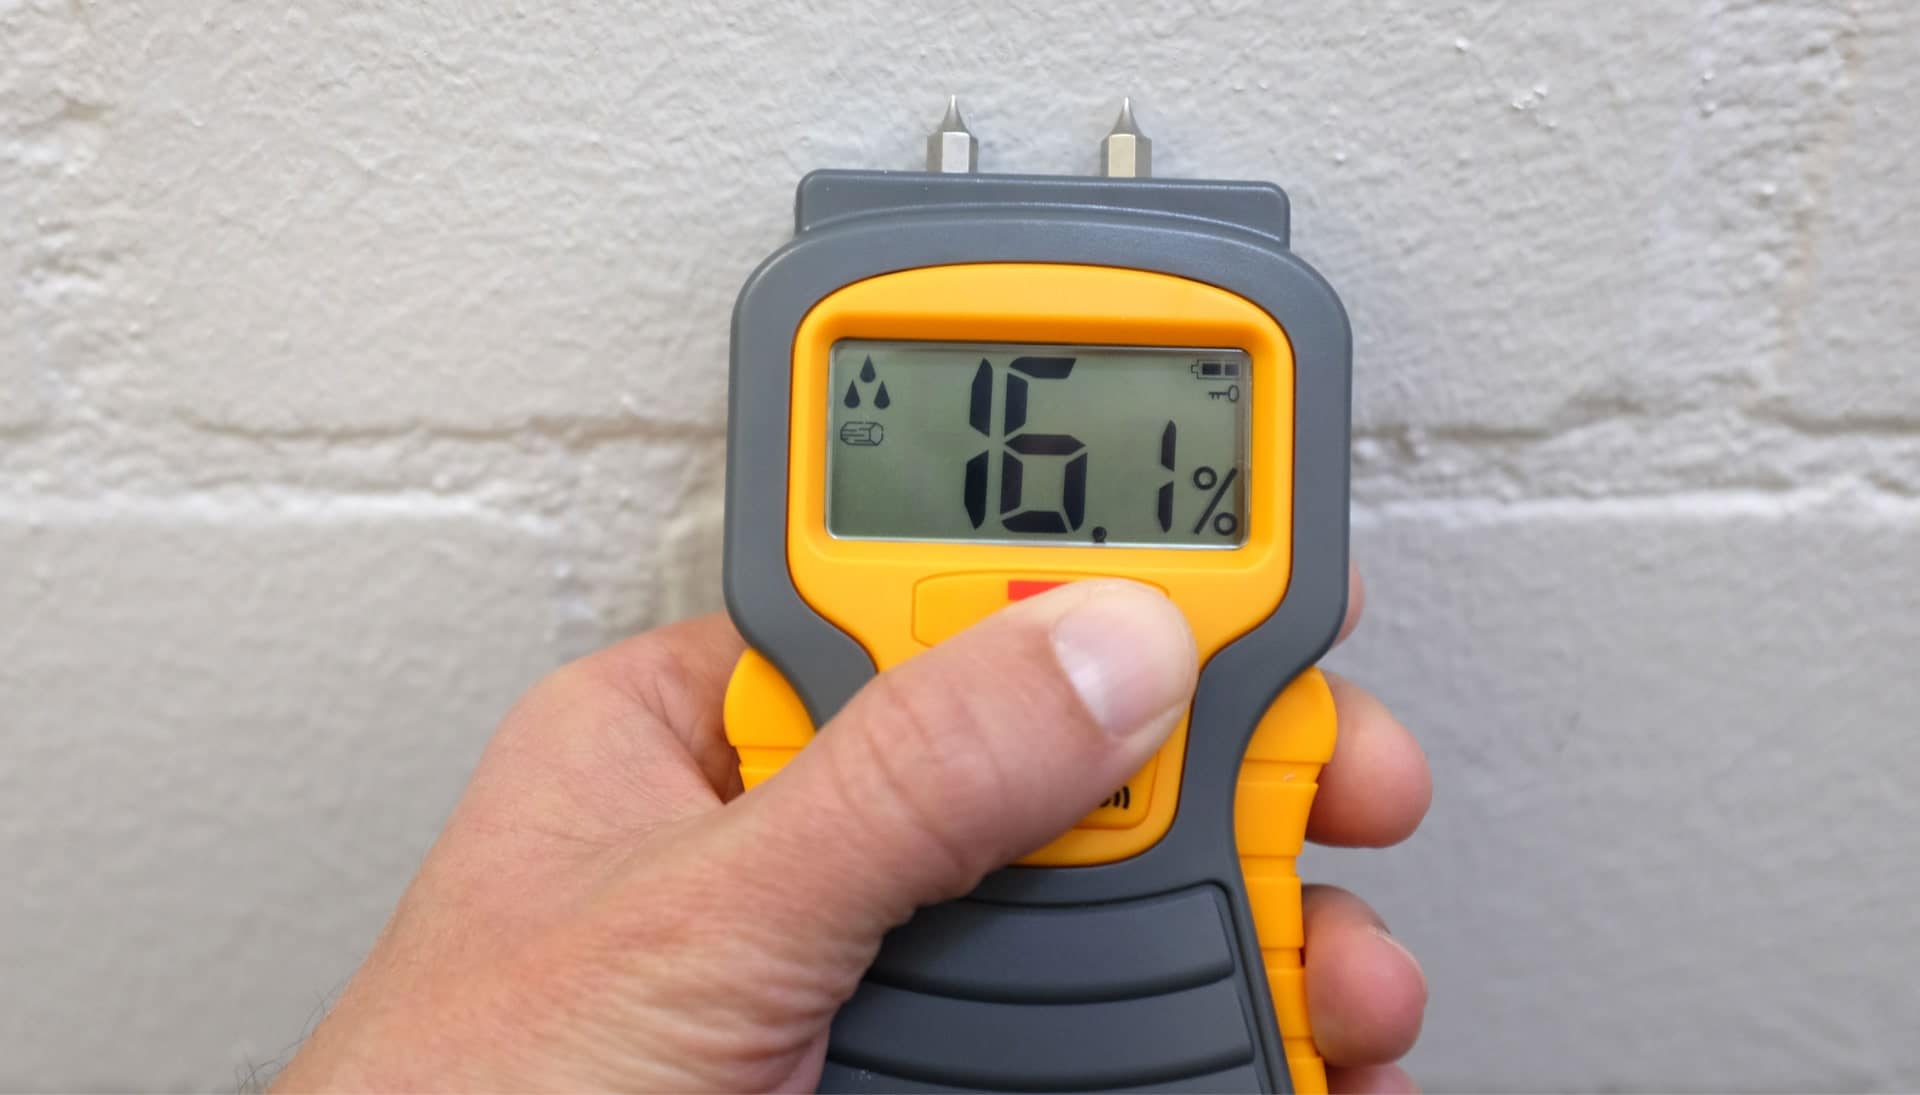 We provide fast, accurate, and affordable mold testing services in Erie, Pennsylvania.